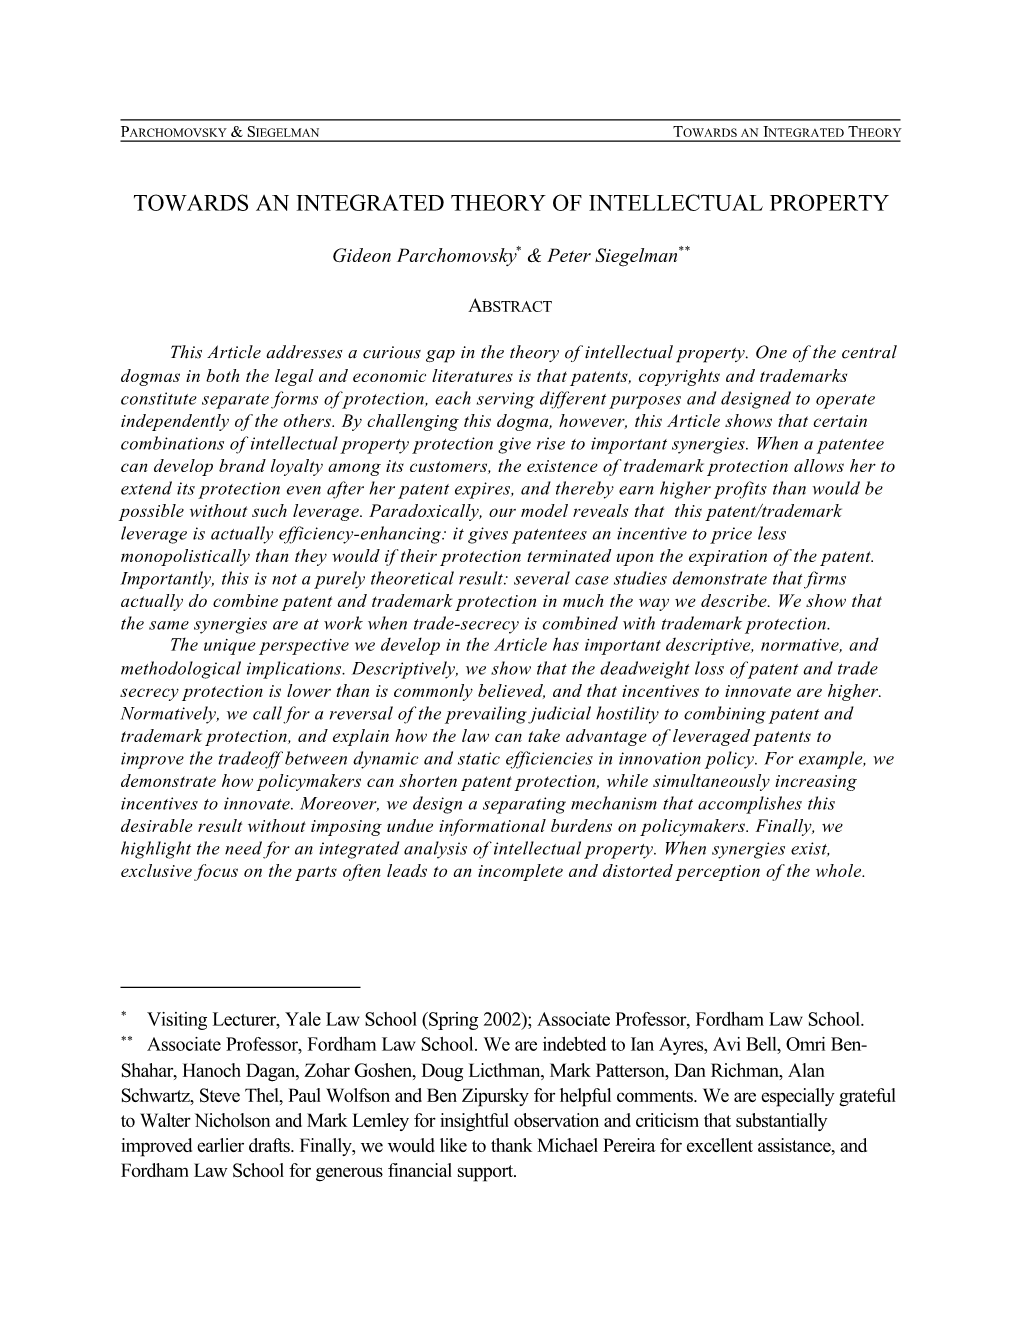 Towards an Integrated Theory of Intellectual Property